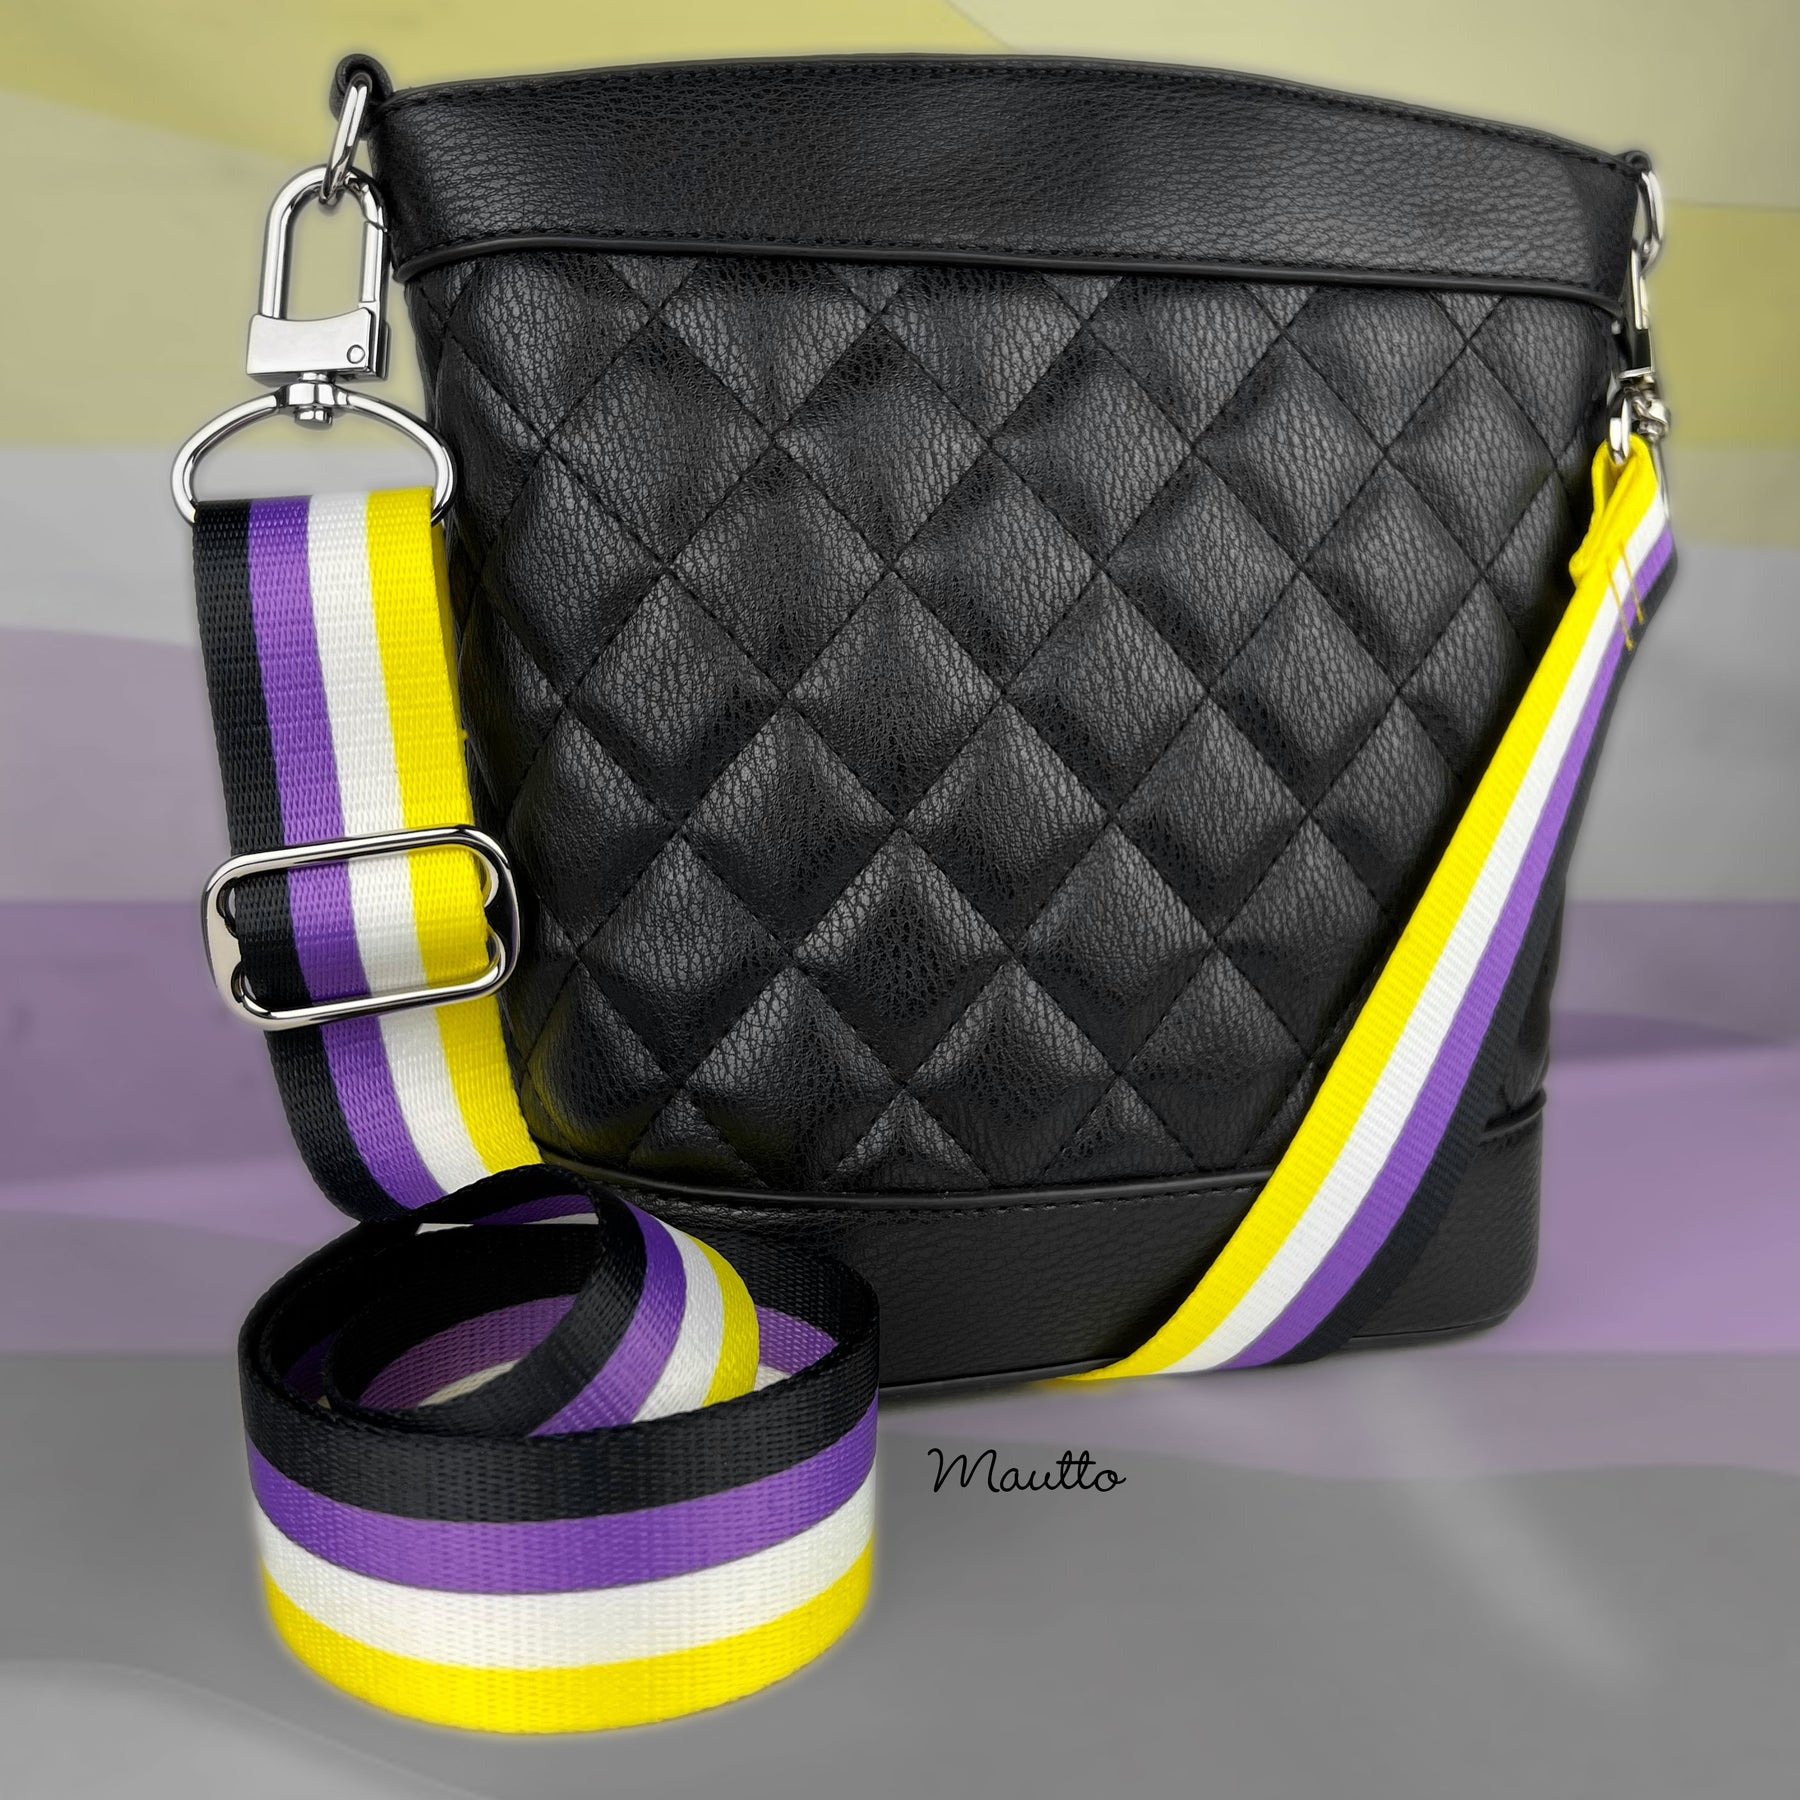 KJIZMO Checkerboard Black and Yellow Shoulder Bag for Women, Handbag with  Chain Strap, Soft Purse Tote Bag for Ladies, Checkerboard Black and Yellow,  One Size : Amazon.ca: Clothing, Shoes & Accessories